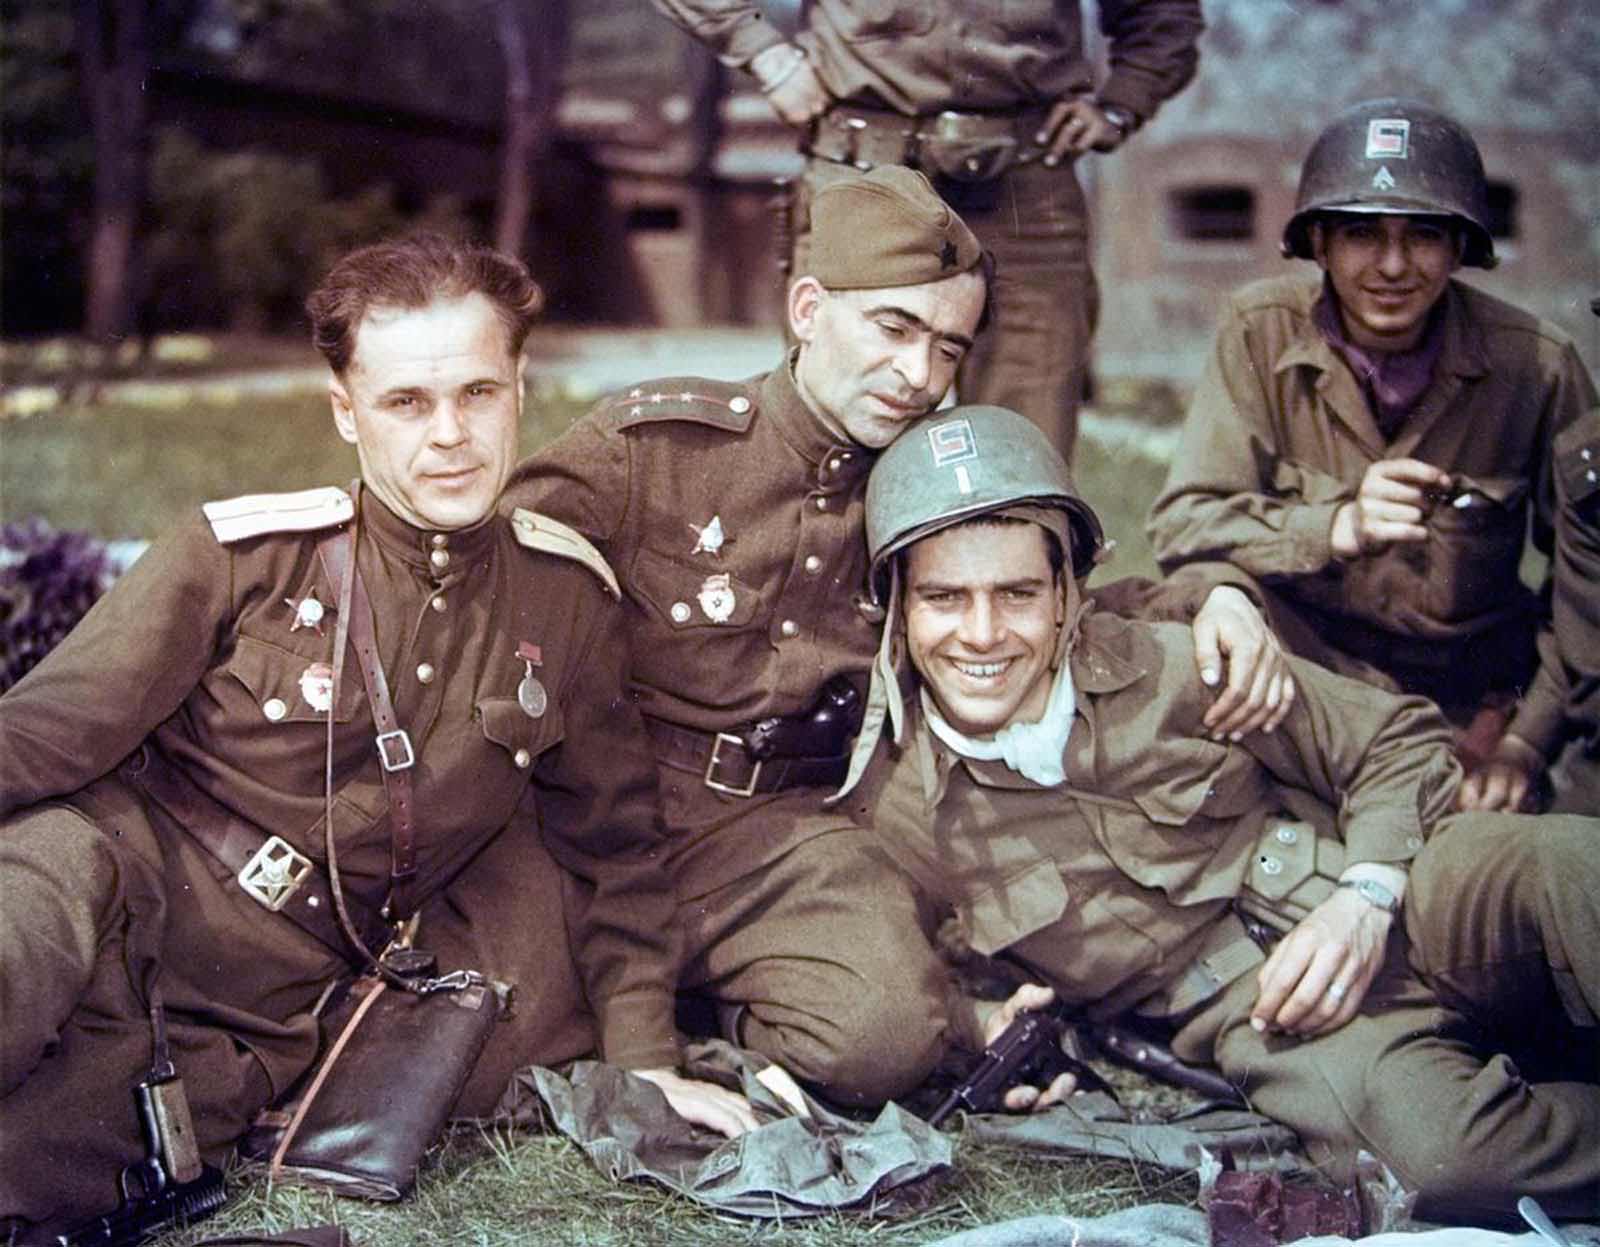 Soviet officers and U.S. soldiers during a friendly meeting on the Elbe River in April of 1945.